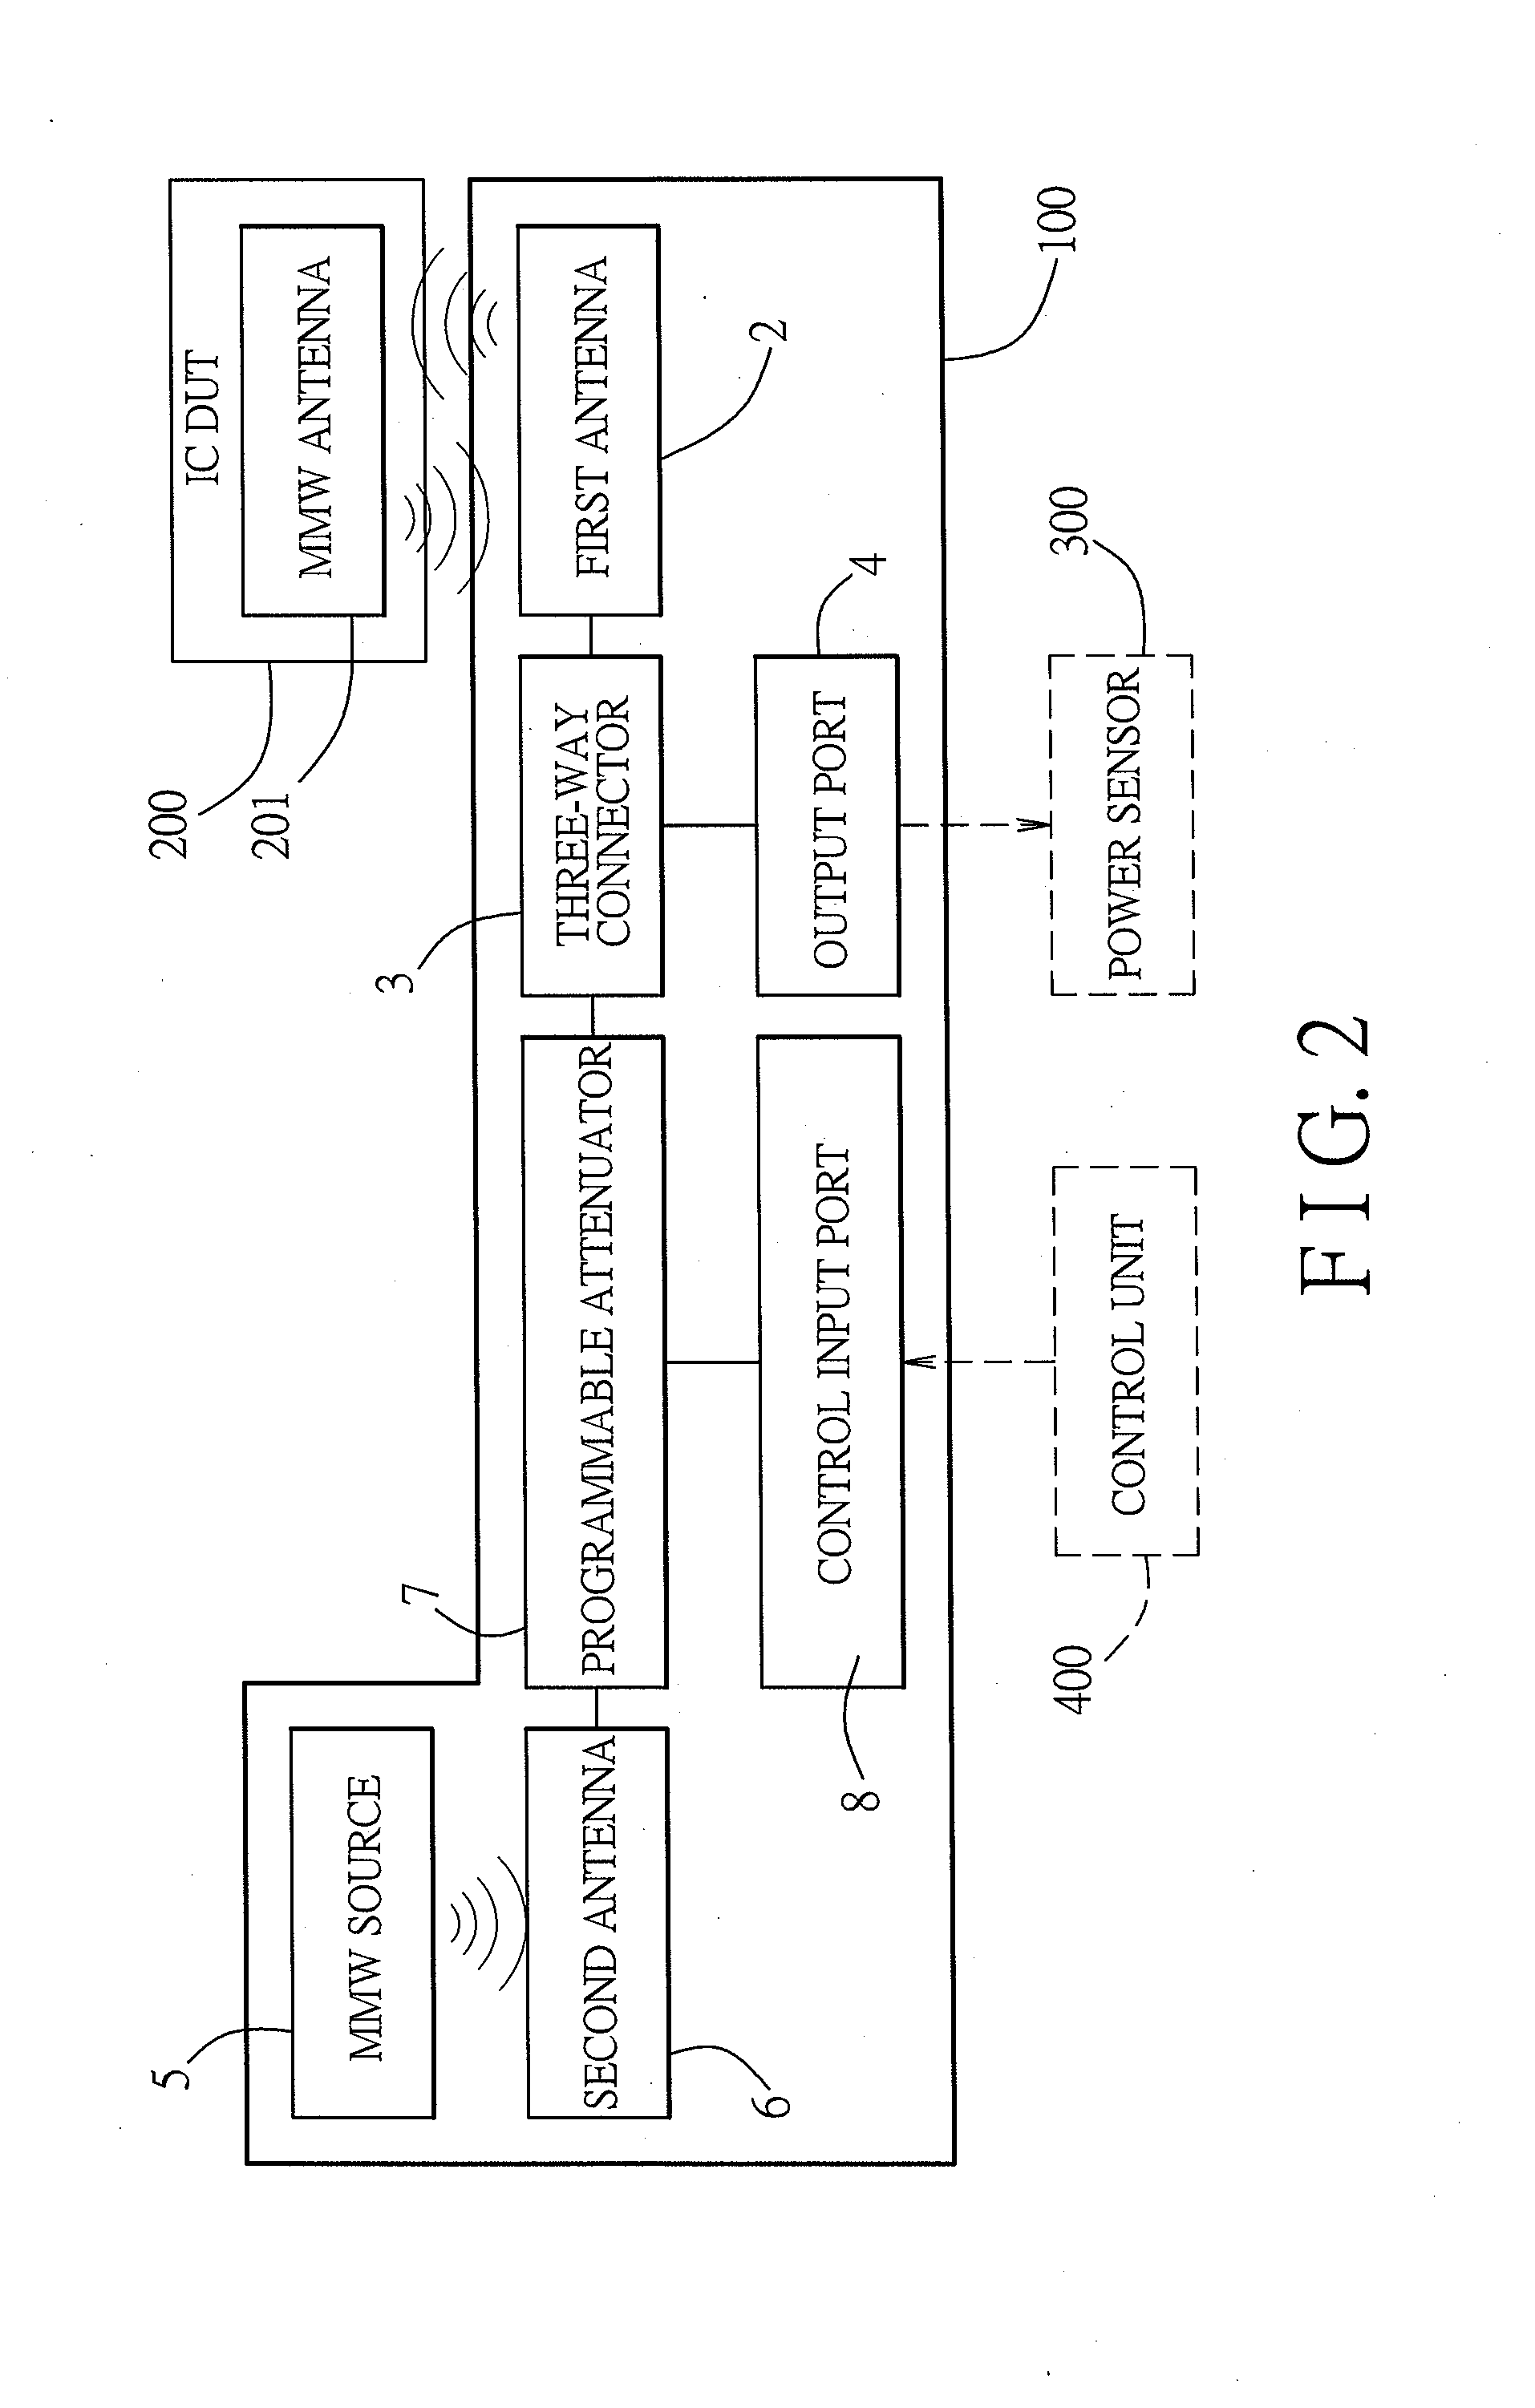 Millimeter wave test fixture for an integrated circuit device under test